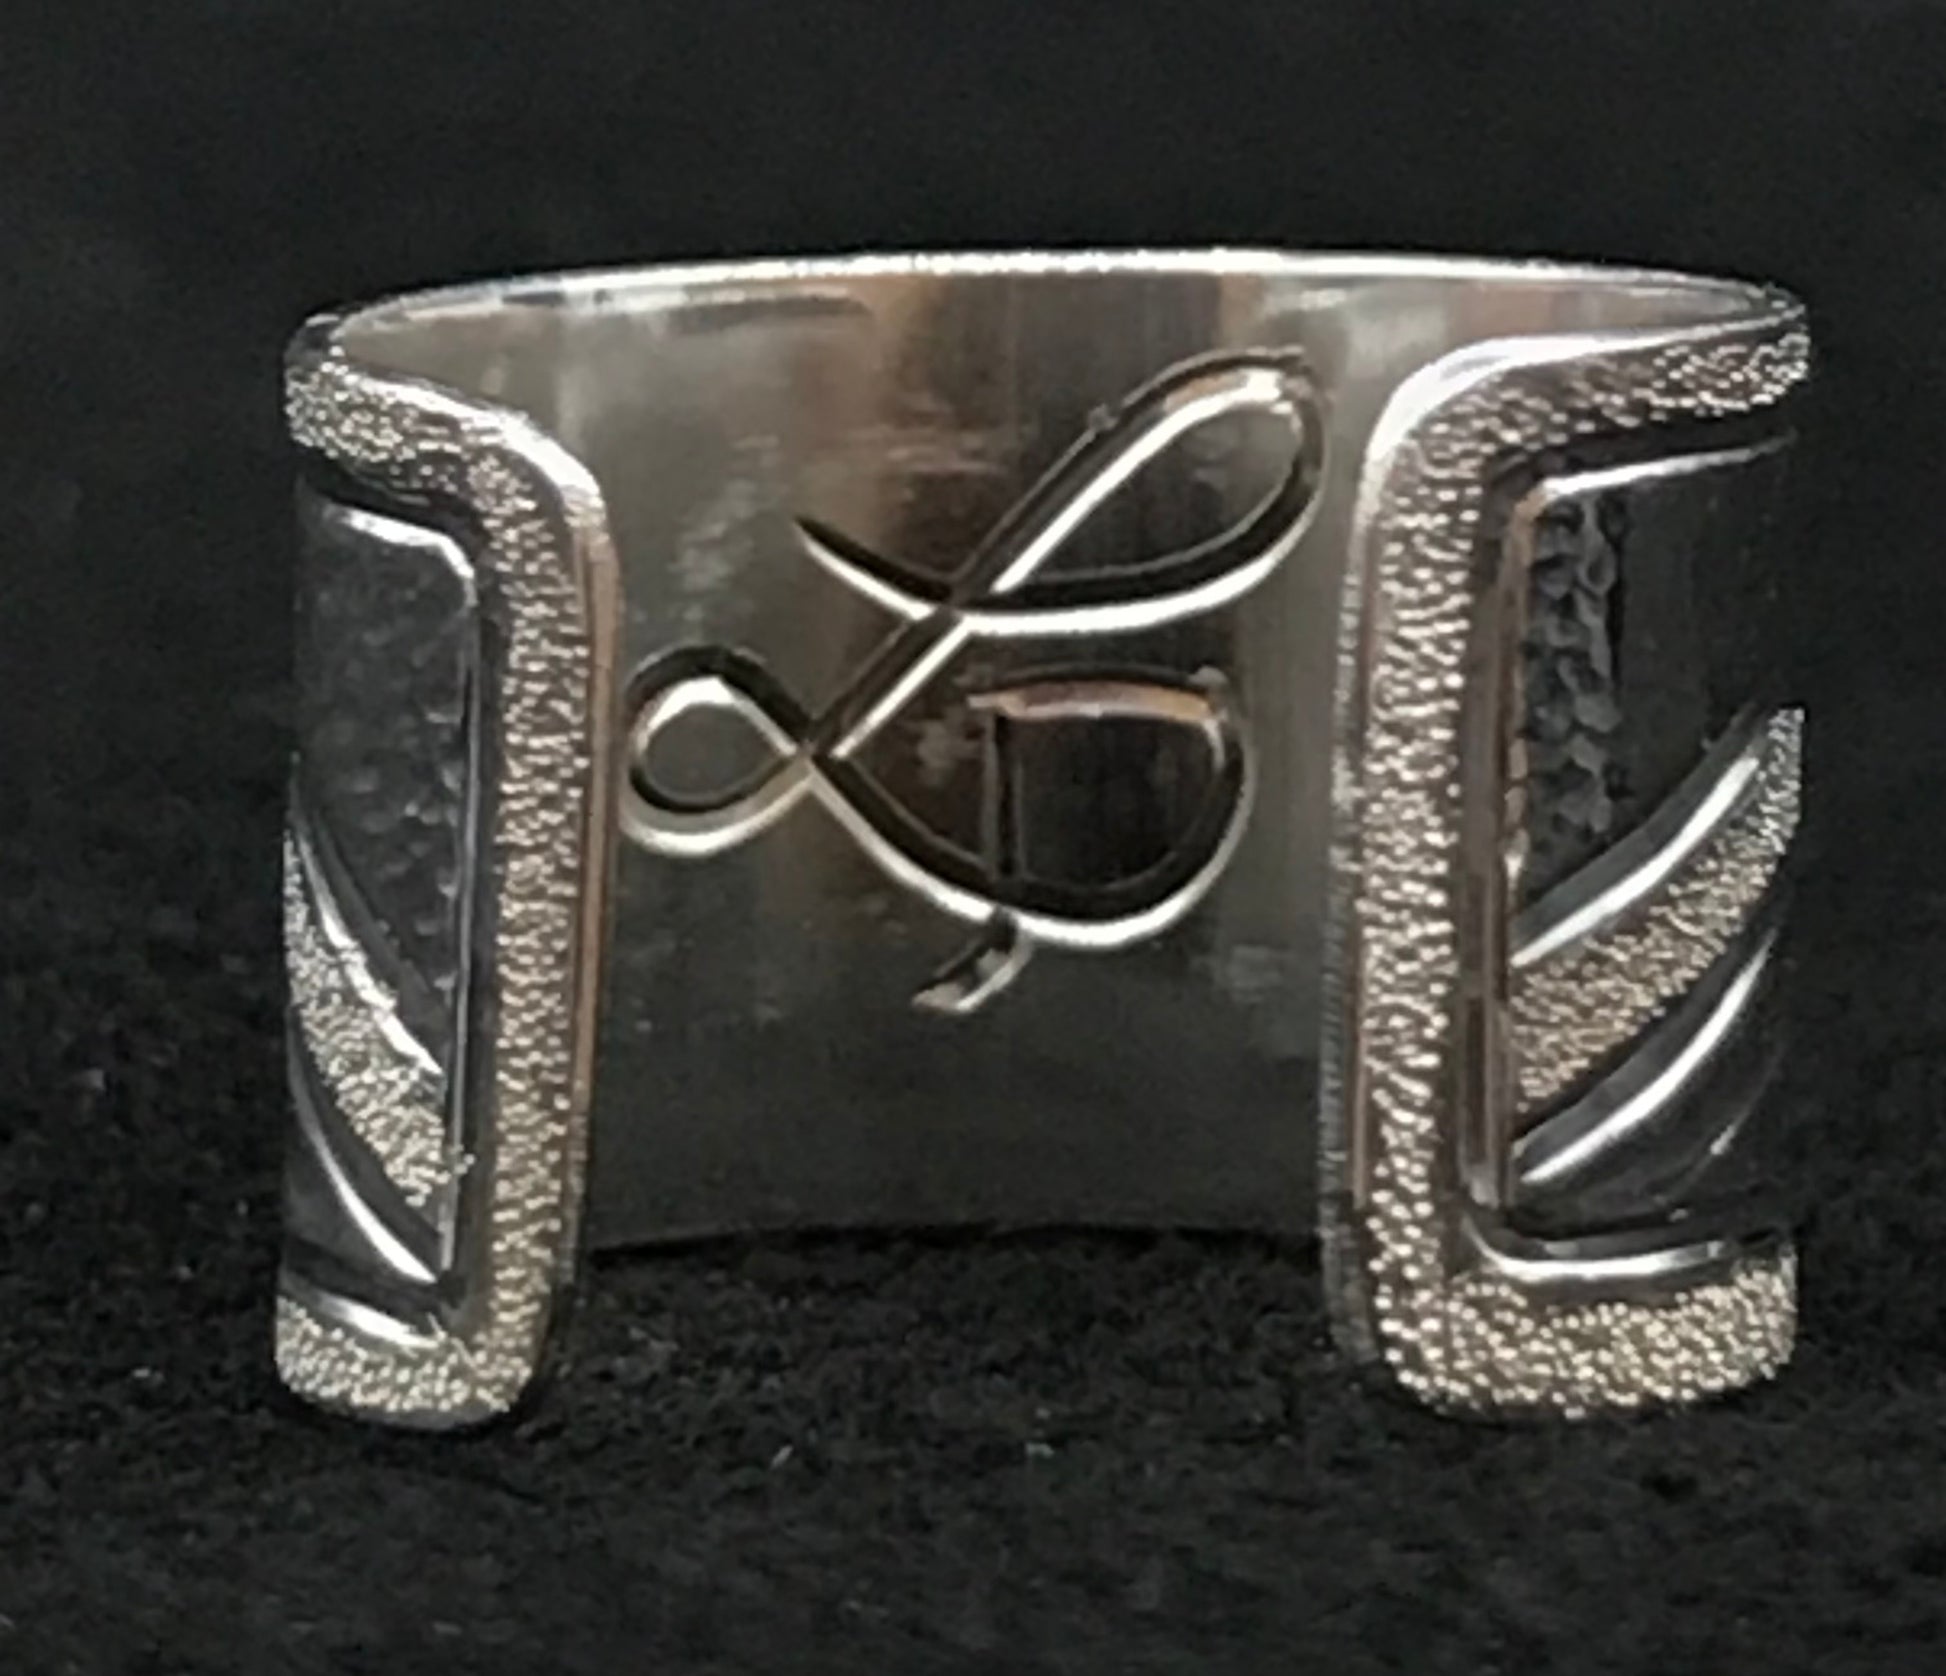 Inside of ear cuff engraved with artist's initials LD.